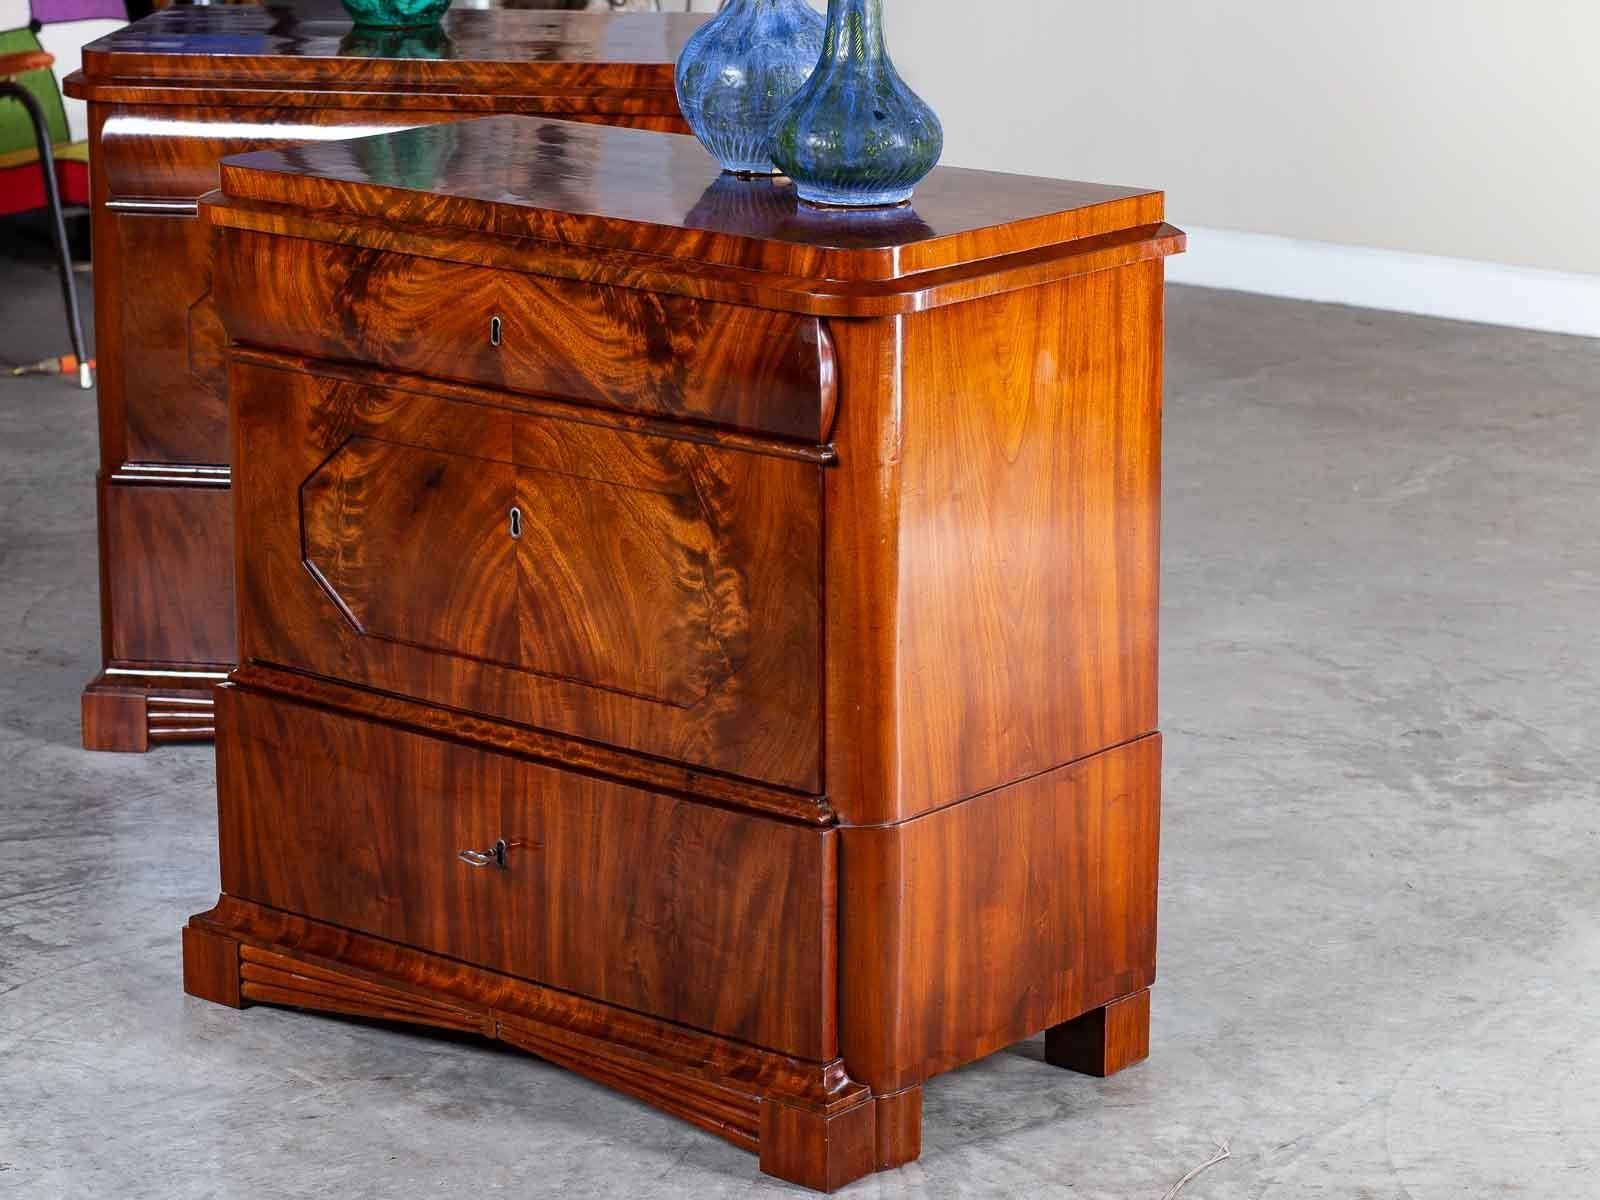 Hand-Crafted Pair of Biedermeier Period North German Mahogany Chest of Drawers, circa 1820